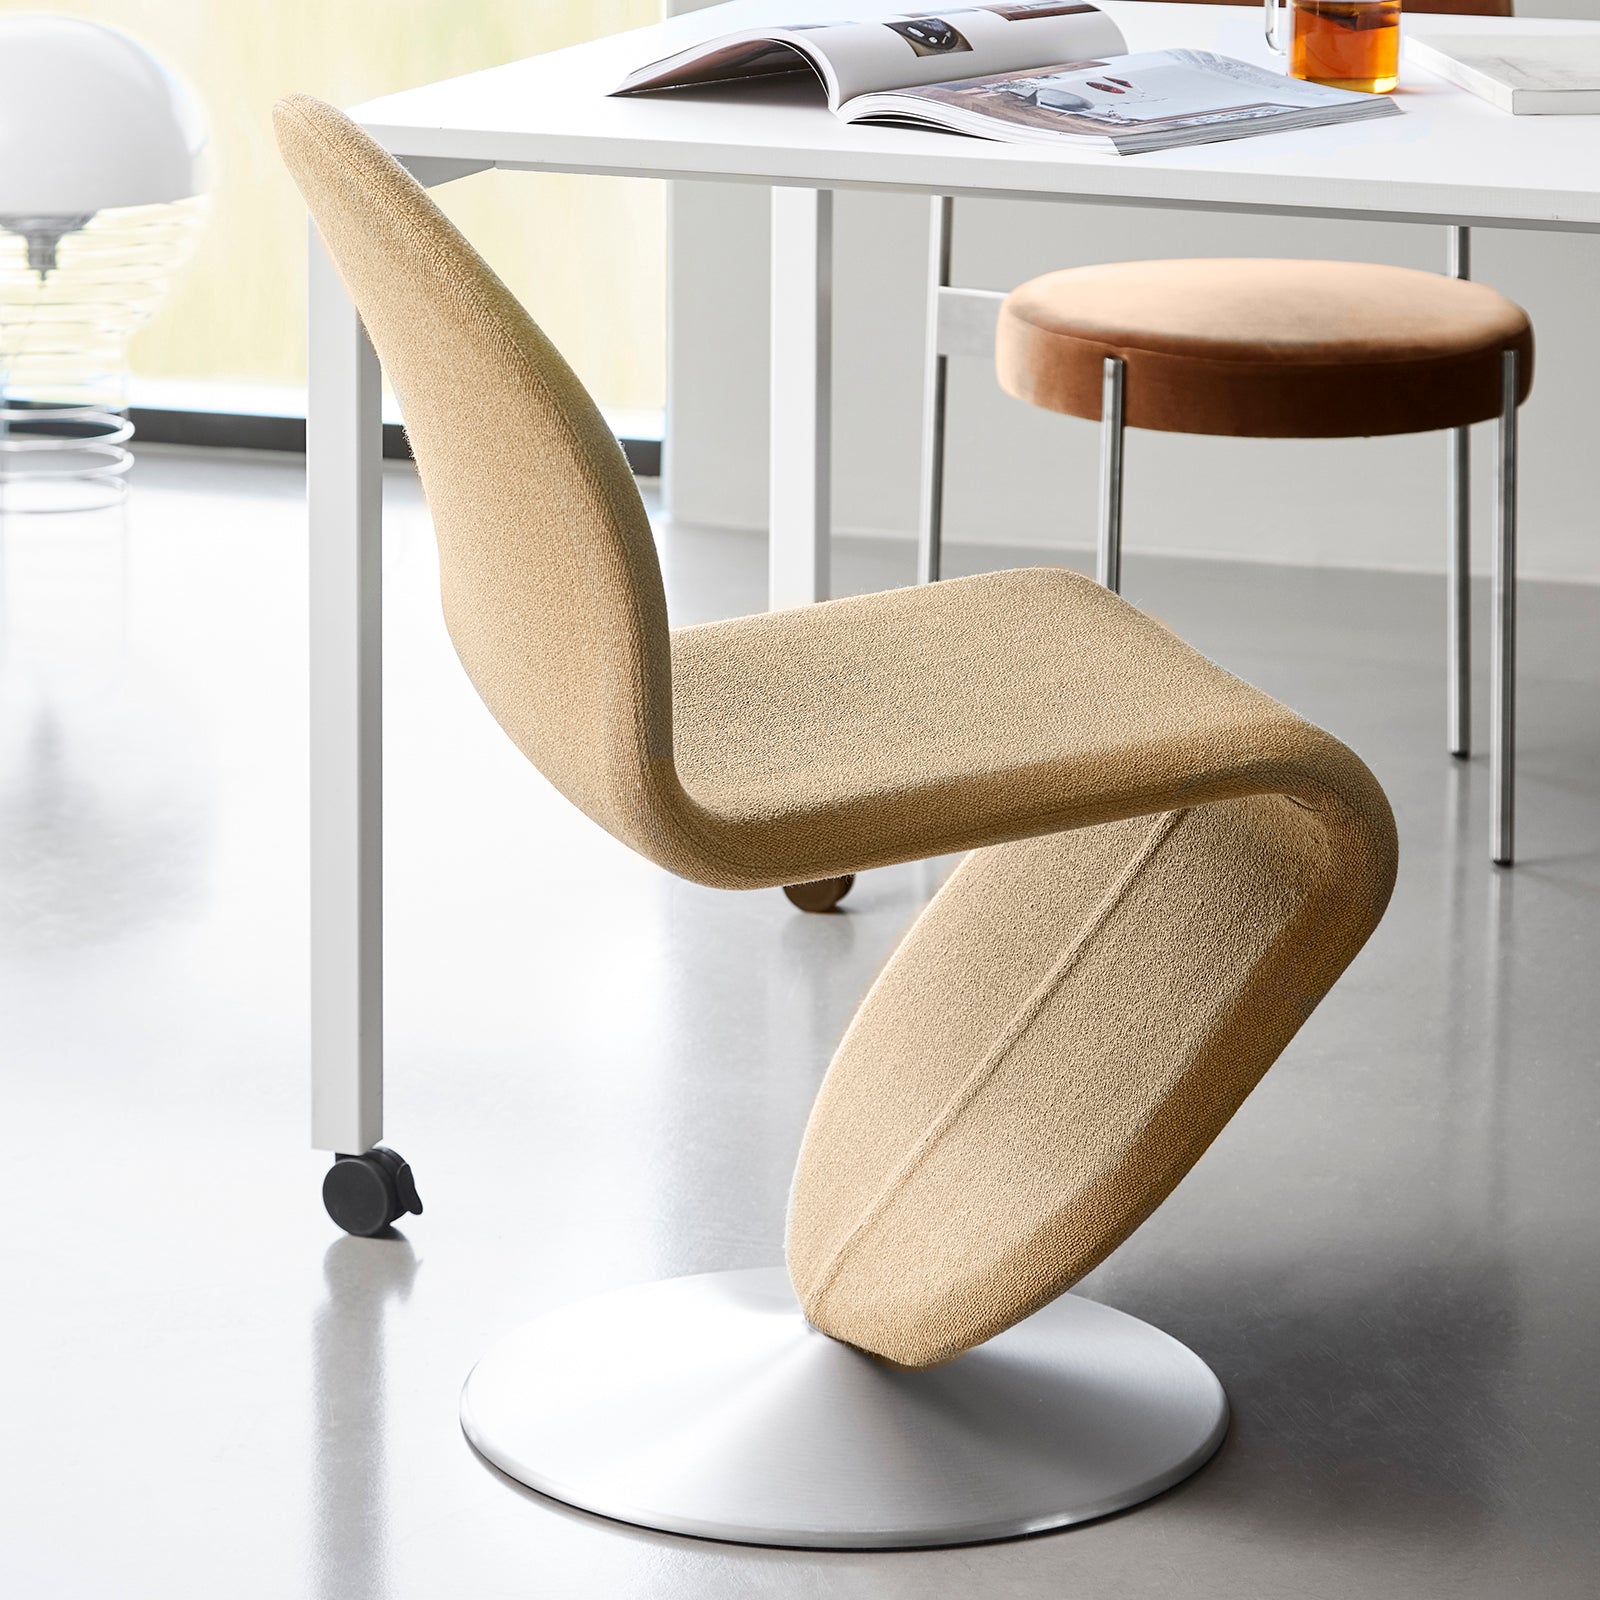 System 1-2-3 Dining Chair: Standard